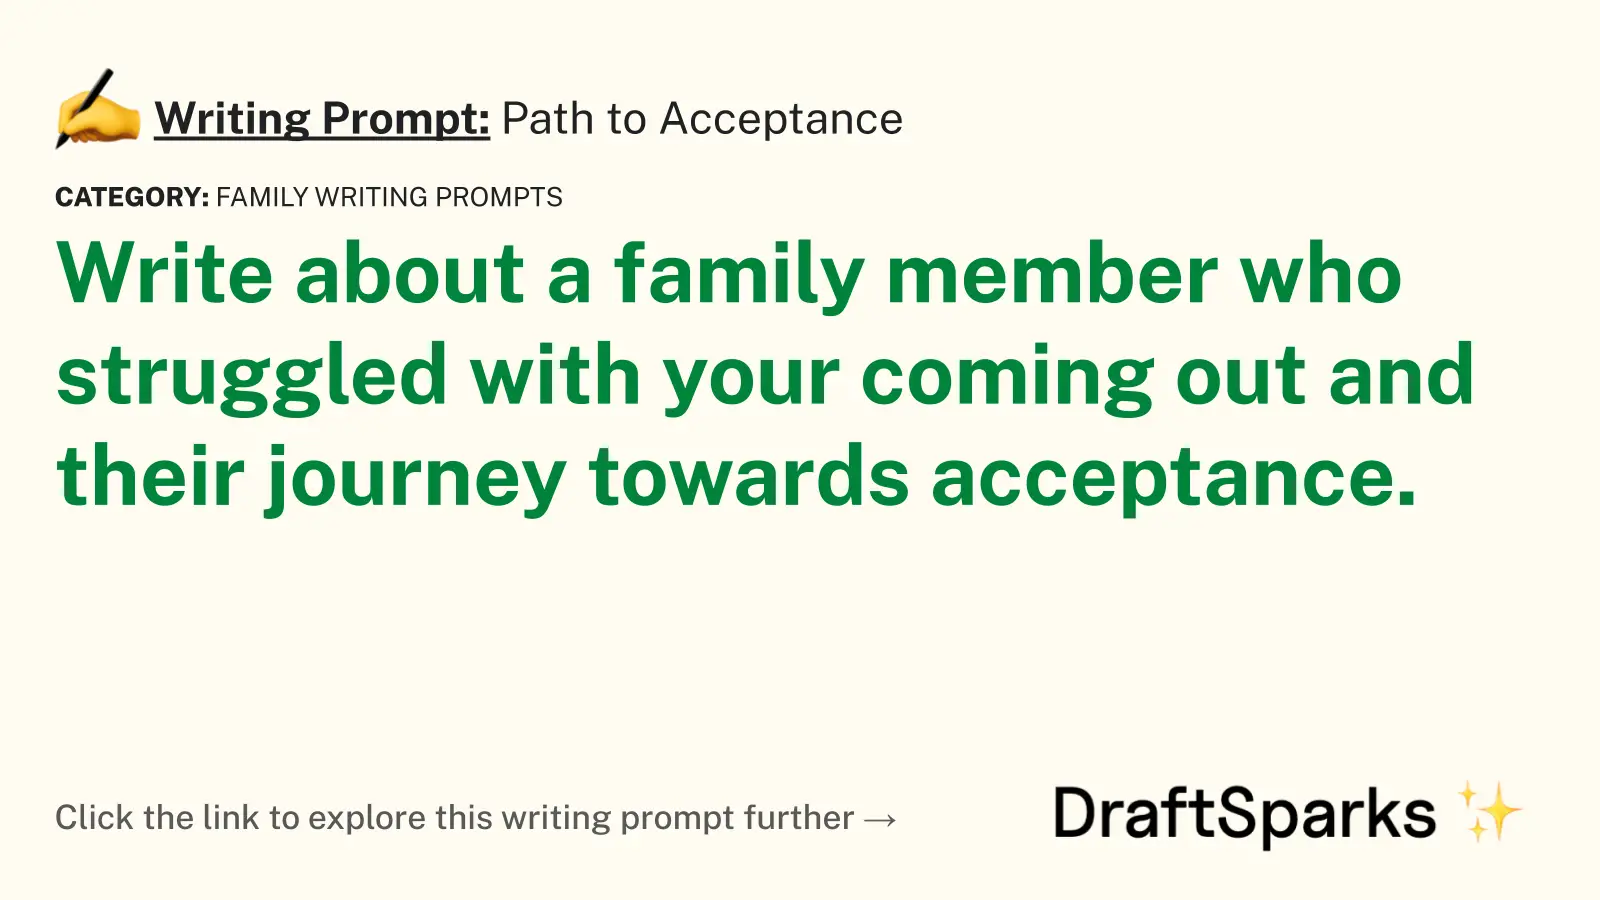 Path to Acceptance